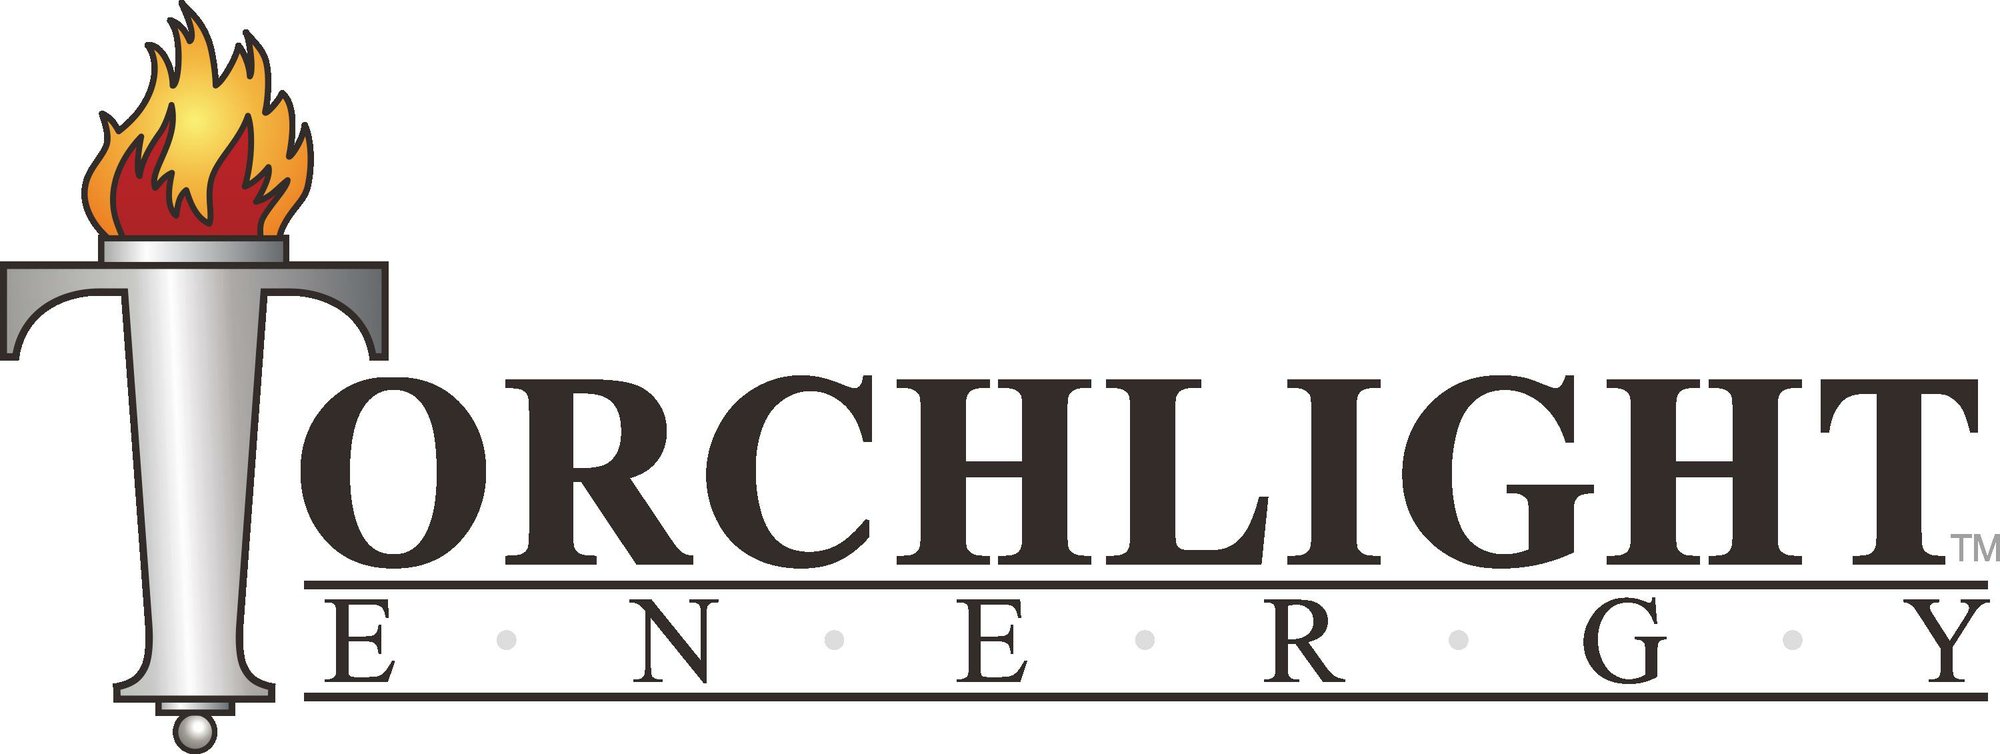 TORCHLIGHT ENERGY RESOURCES INC